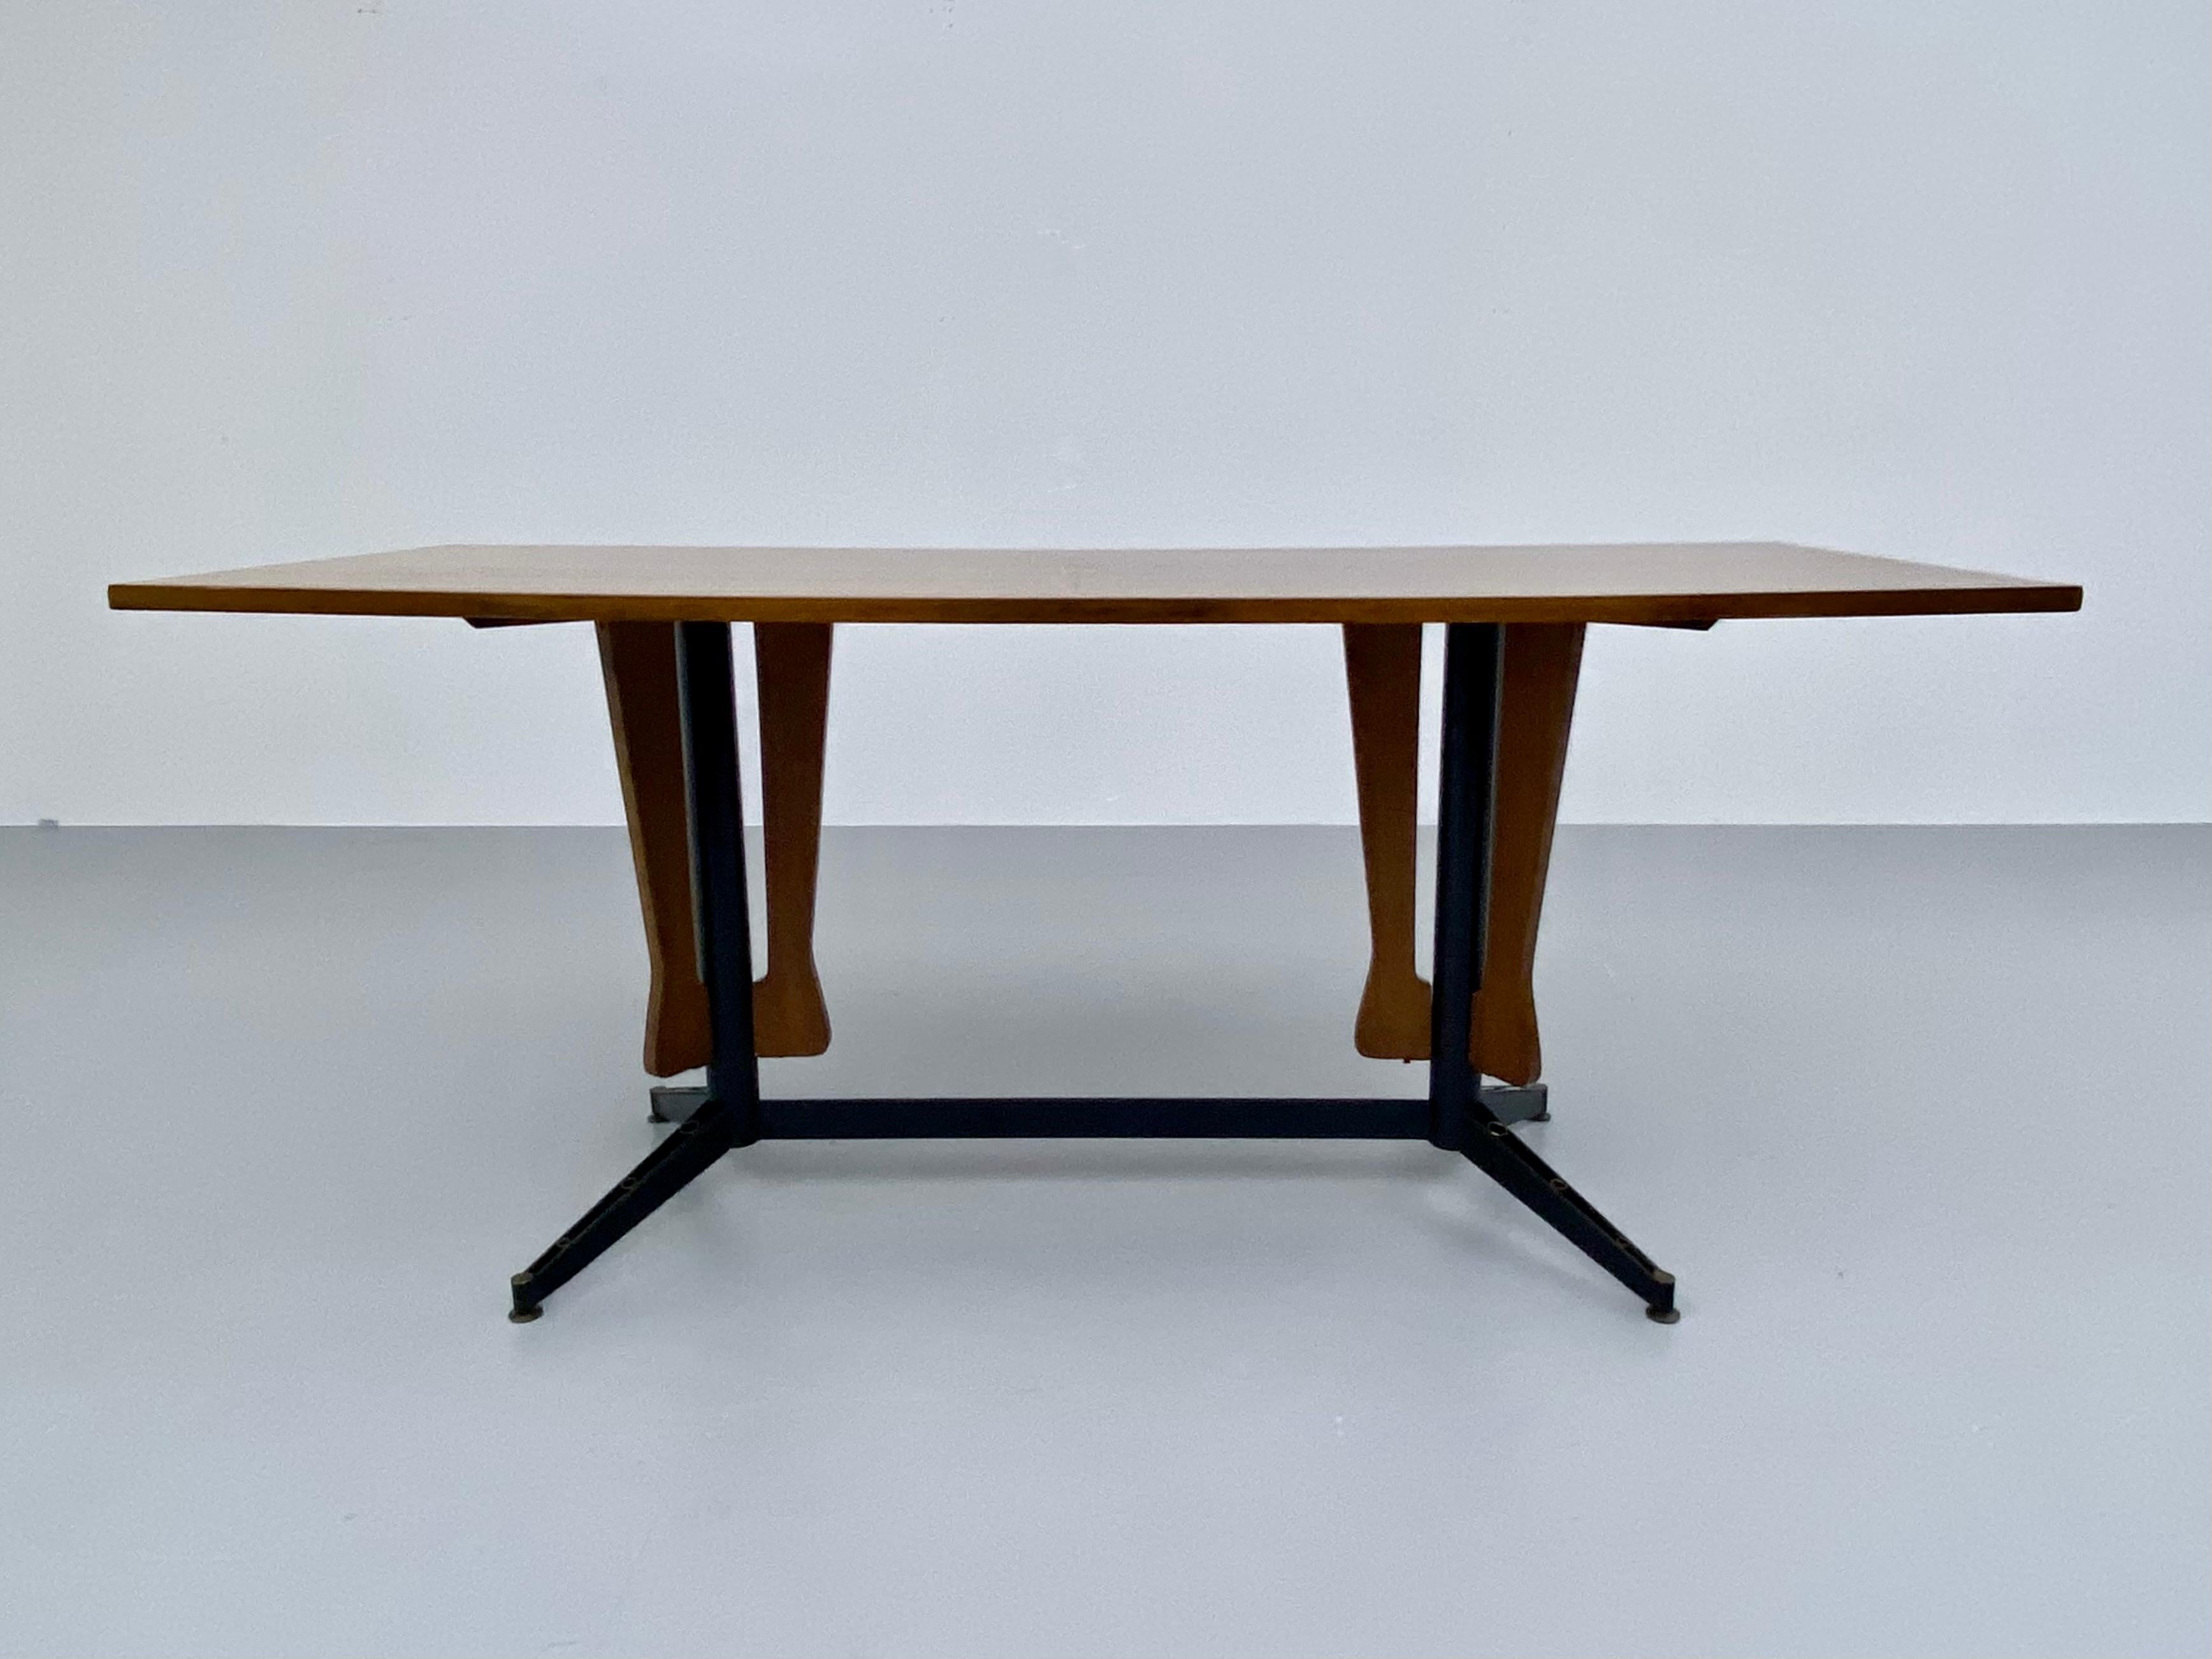 Elegant dining table with romantic steel base. The top has been lacquered and is quite shiny and in very good condition. The shape of the top is slightly tapered towards the sides. The frame is made of steel with some nice typical Carlo Ratti